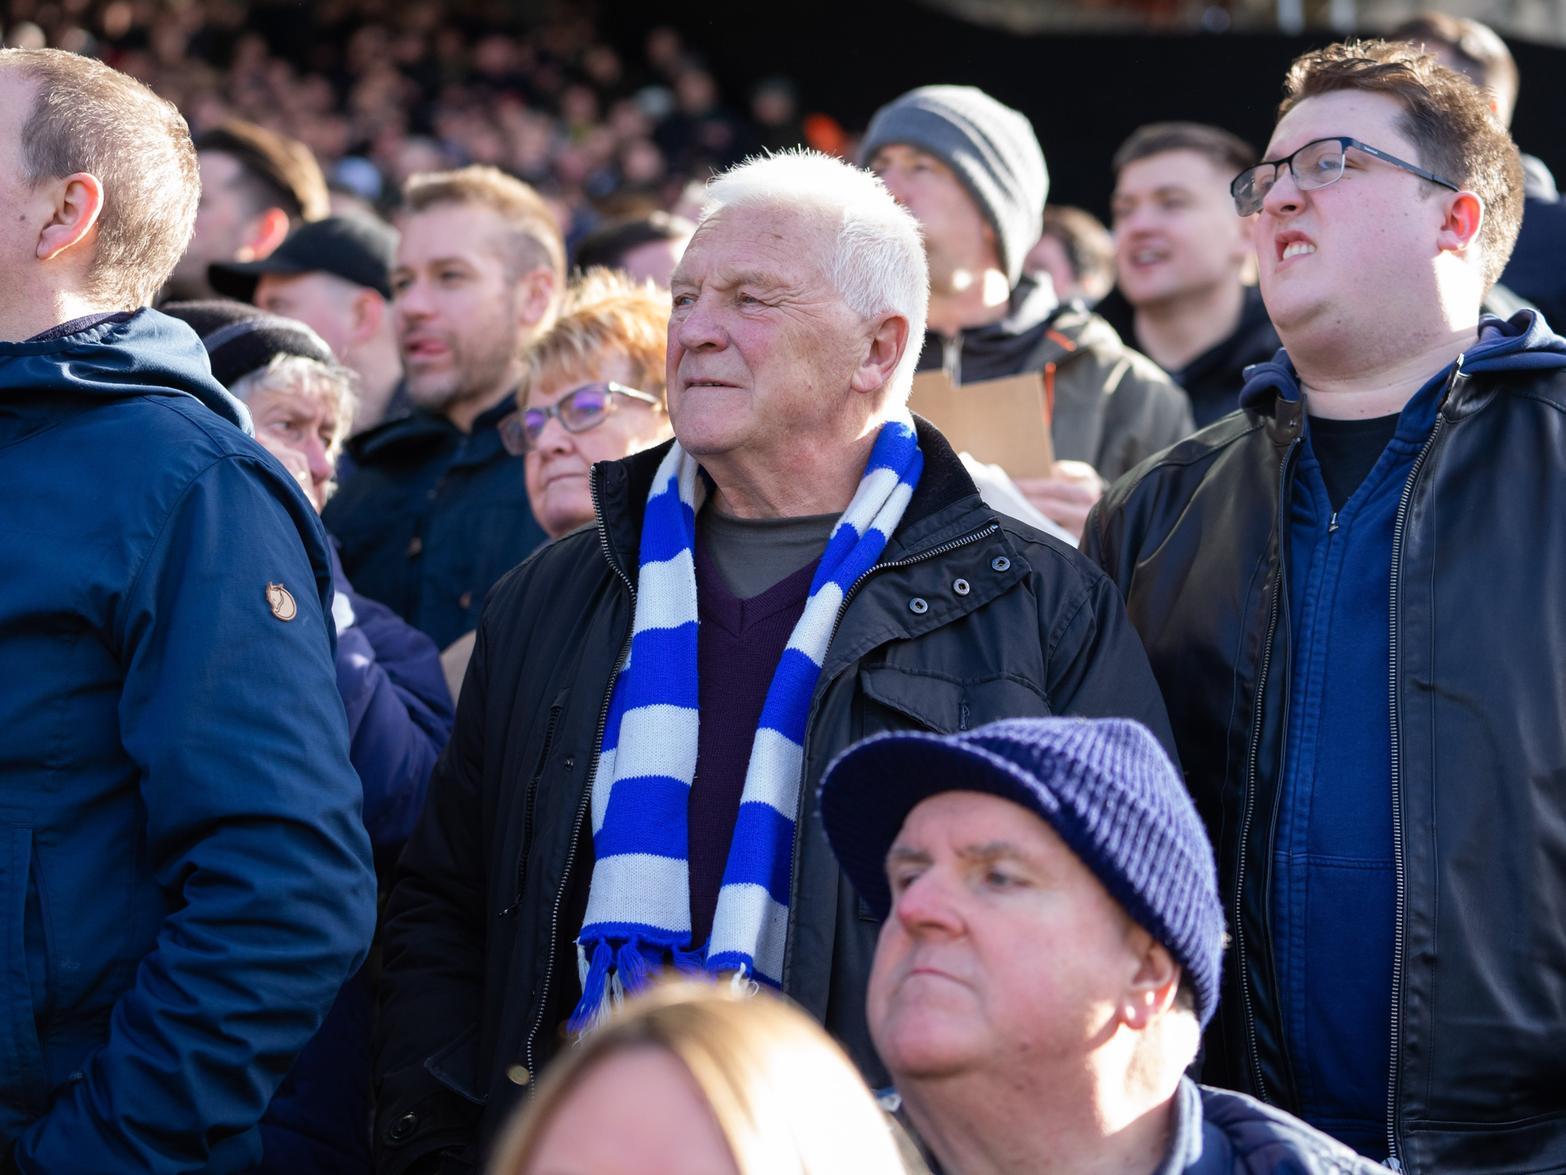 A traditional blue and white scarf is the choice for one fan in a packed away end.